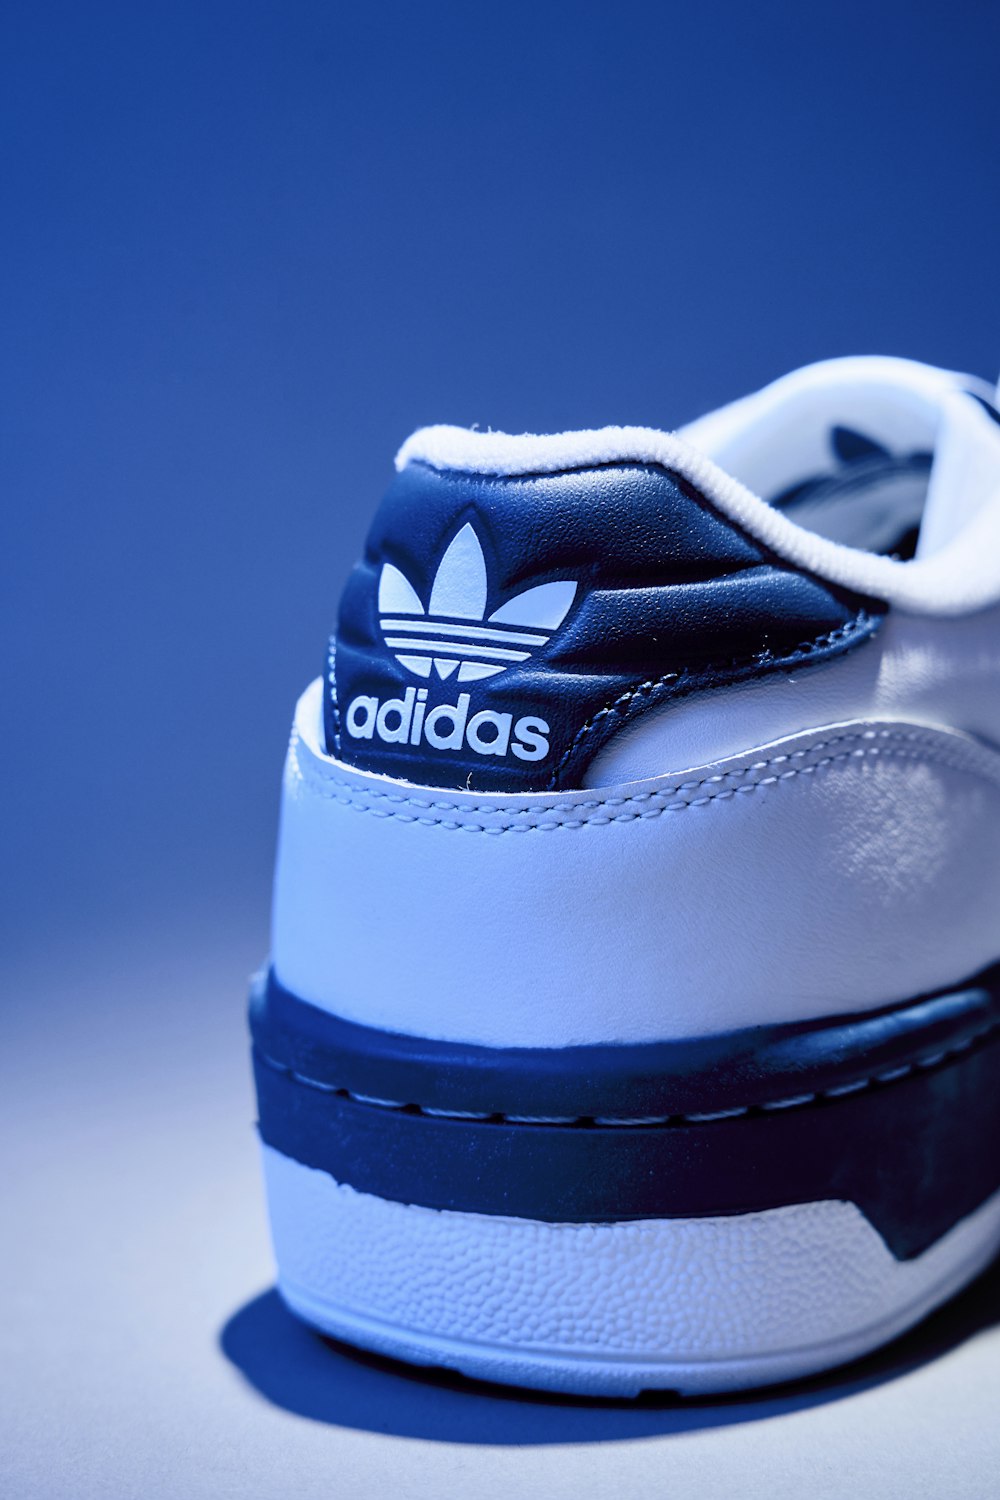 a white and blue adidas sneaker on a table